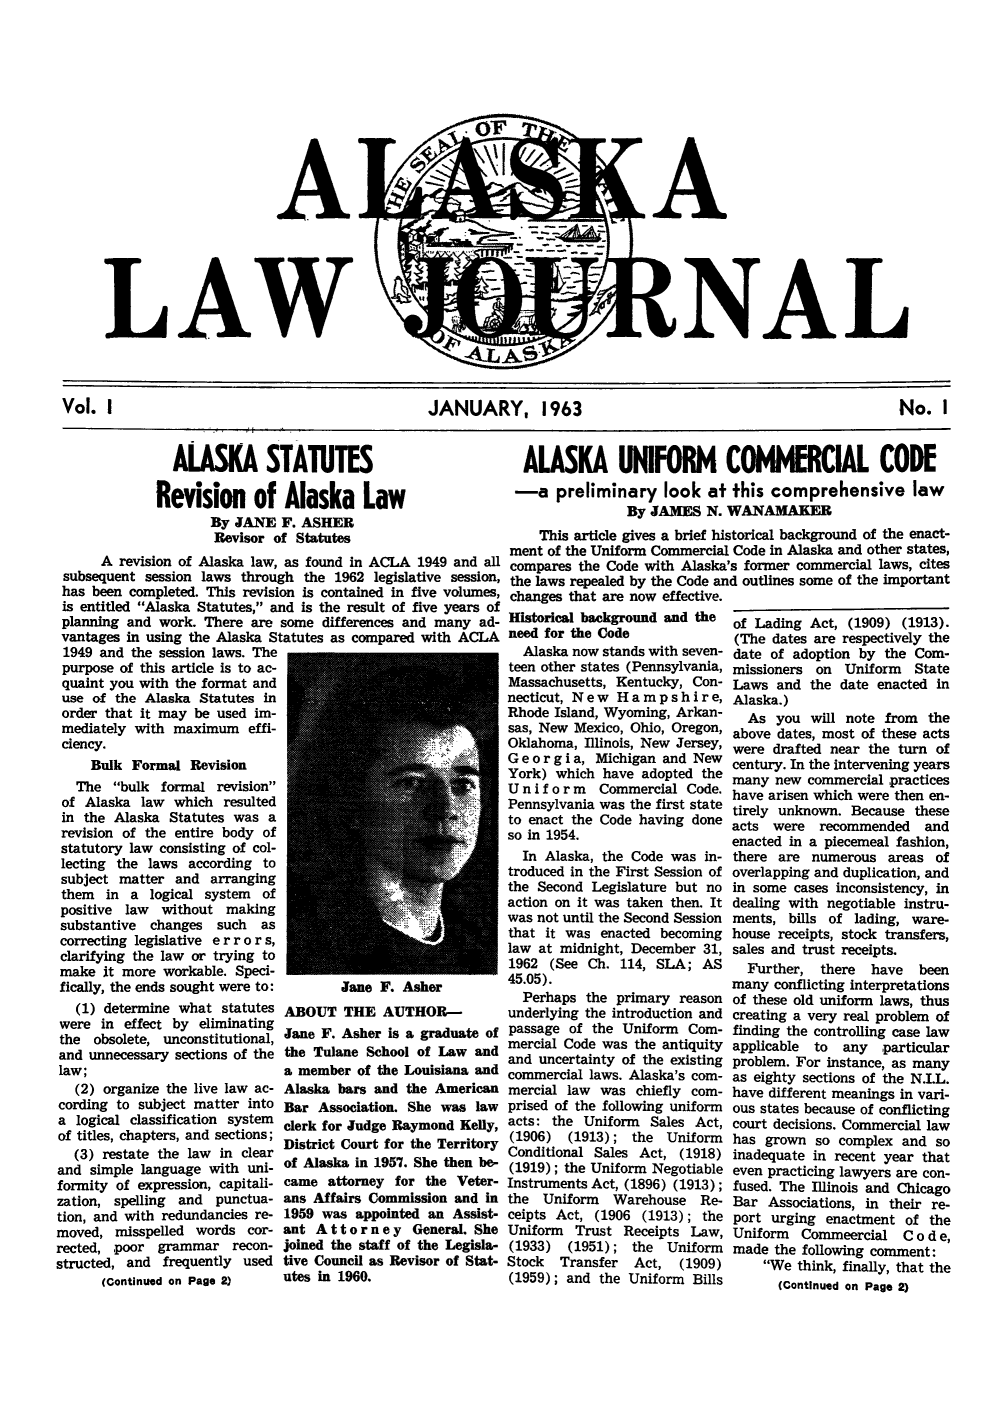 handle is hein.barjournals/alaskalj0001 and id is 1 raw text is: LAW

NA

Vol. I                        JANUARY, 1963                         No. I

ALASKA STA'1JTES
Revision of Alaska Law
By JANE F. ASHER
Revisor of Statutes
A revision of Alaska law, as found in ACLA 1949 and all
subsequent session laws through the 1962 legislative session,
has been completed. This revision is contained in five volumes,
is entitled Alaska Statutes, and is the result of five years of
planning and work. There are some differences and many ad-
vantages in using the Alaska Statutes as compared with ACLA
1949 and the session laws. The
purpose of this article is to ac-
quaint you with the format and
use of the Alaska Statutes in
order that it may be used im-
mediately with maximum effi-

ciency.
Bulk Formal Revision
The bulk formal revision
of Alaska law which resulted
in the Alaska Statutes was a
revision of the entire body of
statutory law consisting of col-
lecting the laws according to
subject matter and arranging
them in a logical system of
positive law without making
substantive changes   such  as
correcting legislative e r r o r s,
clarifying the law or trying to
make it more workable. Speci-
fically, the ends sought were to:
(1) determine what statutes
were in effect by eliminating
the obsolete, unconstitutional,
and unnecessary sections of the
law;
(2) organize the live law ac-
cording to subject matter into
a logical classification system
of titles, chapters, and sections;
(3) restate the law in clear
and simple language with uni-
formity of expression, capitali-
zation, spelling and punctua-
tion, and with redundancies re-
moved, misspelled words cor-
rected, poor grammar recon-
structed, and frequently used
(Continued on Page 2)

Jane F. Asher
ABOUT THE AUTHOR-
Jane F. Asher is a graduate of
the Tulane School of Law and
a member of the Louisiana and
Alaska bars and the American
Bar Association. She was law
clerk for Judge Raymond Kelly,
District Court for the Territory
of Alaska in 1957. She then be-
came attorney for the Veter-
ans Affairs Commission and in
1959 was appointed an Assist-
ant Attorney General. She
joined the staff of the Legisla-
tive Council as Revisor of Stat-
utes in 1960.

ALASKA UNIFORM COMMERCIAL CODE
-a preliminary look at this comprehensive law
By JAMES N. WANAMAXER
This article gives a brief historical background of the enact-
ment of the Uniform Commercial Code in Alaska and other states,
compares the Code with Alaska's former commercial laws, cites
the laws repealed by the Code and outlines some of the important
changes that are now effective.

zlli1orival DuU4KlgOUlI aIU Imu
need for the Code
Alaska now stands with seven-
teen other states (Pennsylvania,
Massachusetts, Kentucky, Con-
necticut, New Hampshire,
Rhode Island, Wyoming, Arkan-
sas, New Mexico, Ohio, Oregon,
Oklahoma, Illinois, New Jersey,
Georgia, Michigan and New
York) which have adopted the
U n i f o r m Commercial Code.
Pennsylvania was the first state
to enact the Code having done
so in 1954.
In Alaska, the Code was in-
troduced in the First Session of
the Second Legislature but no
action on it was taken then. It
was not until the Second Session
that it was enacted becoming
law at midnight, December 31,
1962 (See Ch. 114, SLA; AS
45.05).
Perhaps the primary reason
underlying the introduction and
passage of the Uniform Com-
mercial Code was the antiquity
and uncertainty of the existing
commercial laws. Alaska's com-
mercial law was chiefly com-
prised of the following uniform
acts: the Uniform Sales Act,
(1906) (1913); the Uniform
Conditional Sales Act, (1918)
(1919); the Uniform Negotiable
Instruments Act, (1896) (1913);
the Uniform   Warehouse Re-
ceipts Act, (1906 (1913); the
Uniform Trust Receipts Law,
(1933) (1951); the Uniform
Stock  Transfer  Act, (1909)
(1959); and the Uniform Bills

of Lading Act, (1909) (1913).
(The dates are respectively the
date of adoption by the Com-
missioners on Uniform State
Laws and the date enacted in
Alaska.)
As you will note from the
above dates, most of these acts
were drafted near the turn of
century. In the intervening years
many new commercial practices
have arisen which were then en-
tirely unknown. Because these
acts were   recommended    and
enacted in a piecemeal fashion,
there are numerous areas of
overlapping and duplication, and
in some cases inconsistency, in
dealing with negotiable instru-
ments, bills of lading, ware-
house receipts, stock transfers,
sales and trust receipts.
Further, there   have   been
many conflicting interpretations
of these old uniform laws, thus
creating a very real problem of
finding the controlling case law
applicable  to  any  particular
problem. For instance, as many
as eighty sections of the N.I.L.
have different meanings in vari-
ous states because of conflicting
court decisions. Commercial law
has grown so complex and so
inadequate in recent year that
even practicing lawyers are con-
fused. The Illinois and Chicago
Bar Associations, in their re-
port urging enactment of the
Uniform Commeercial C o d e,
made the following comment:
We think, finally, that the
(Continued on Page 2)


